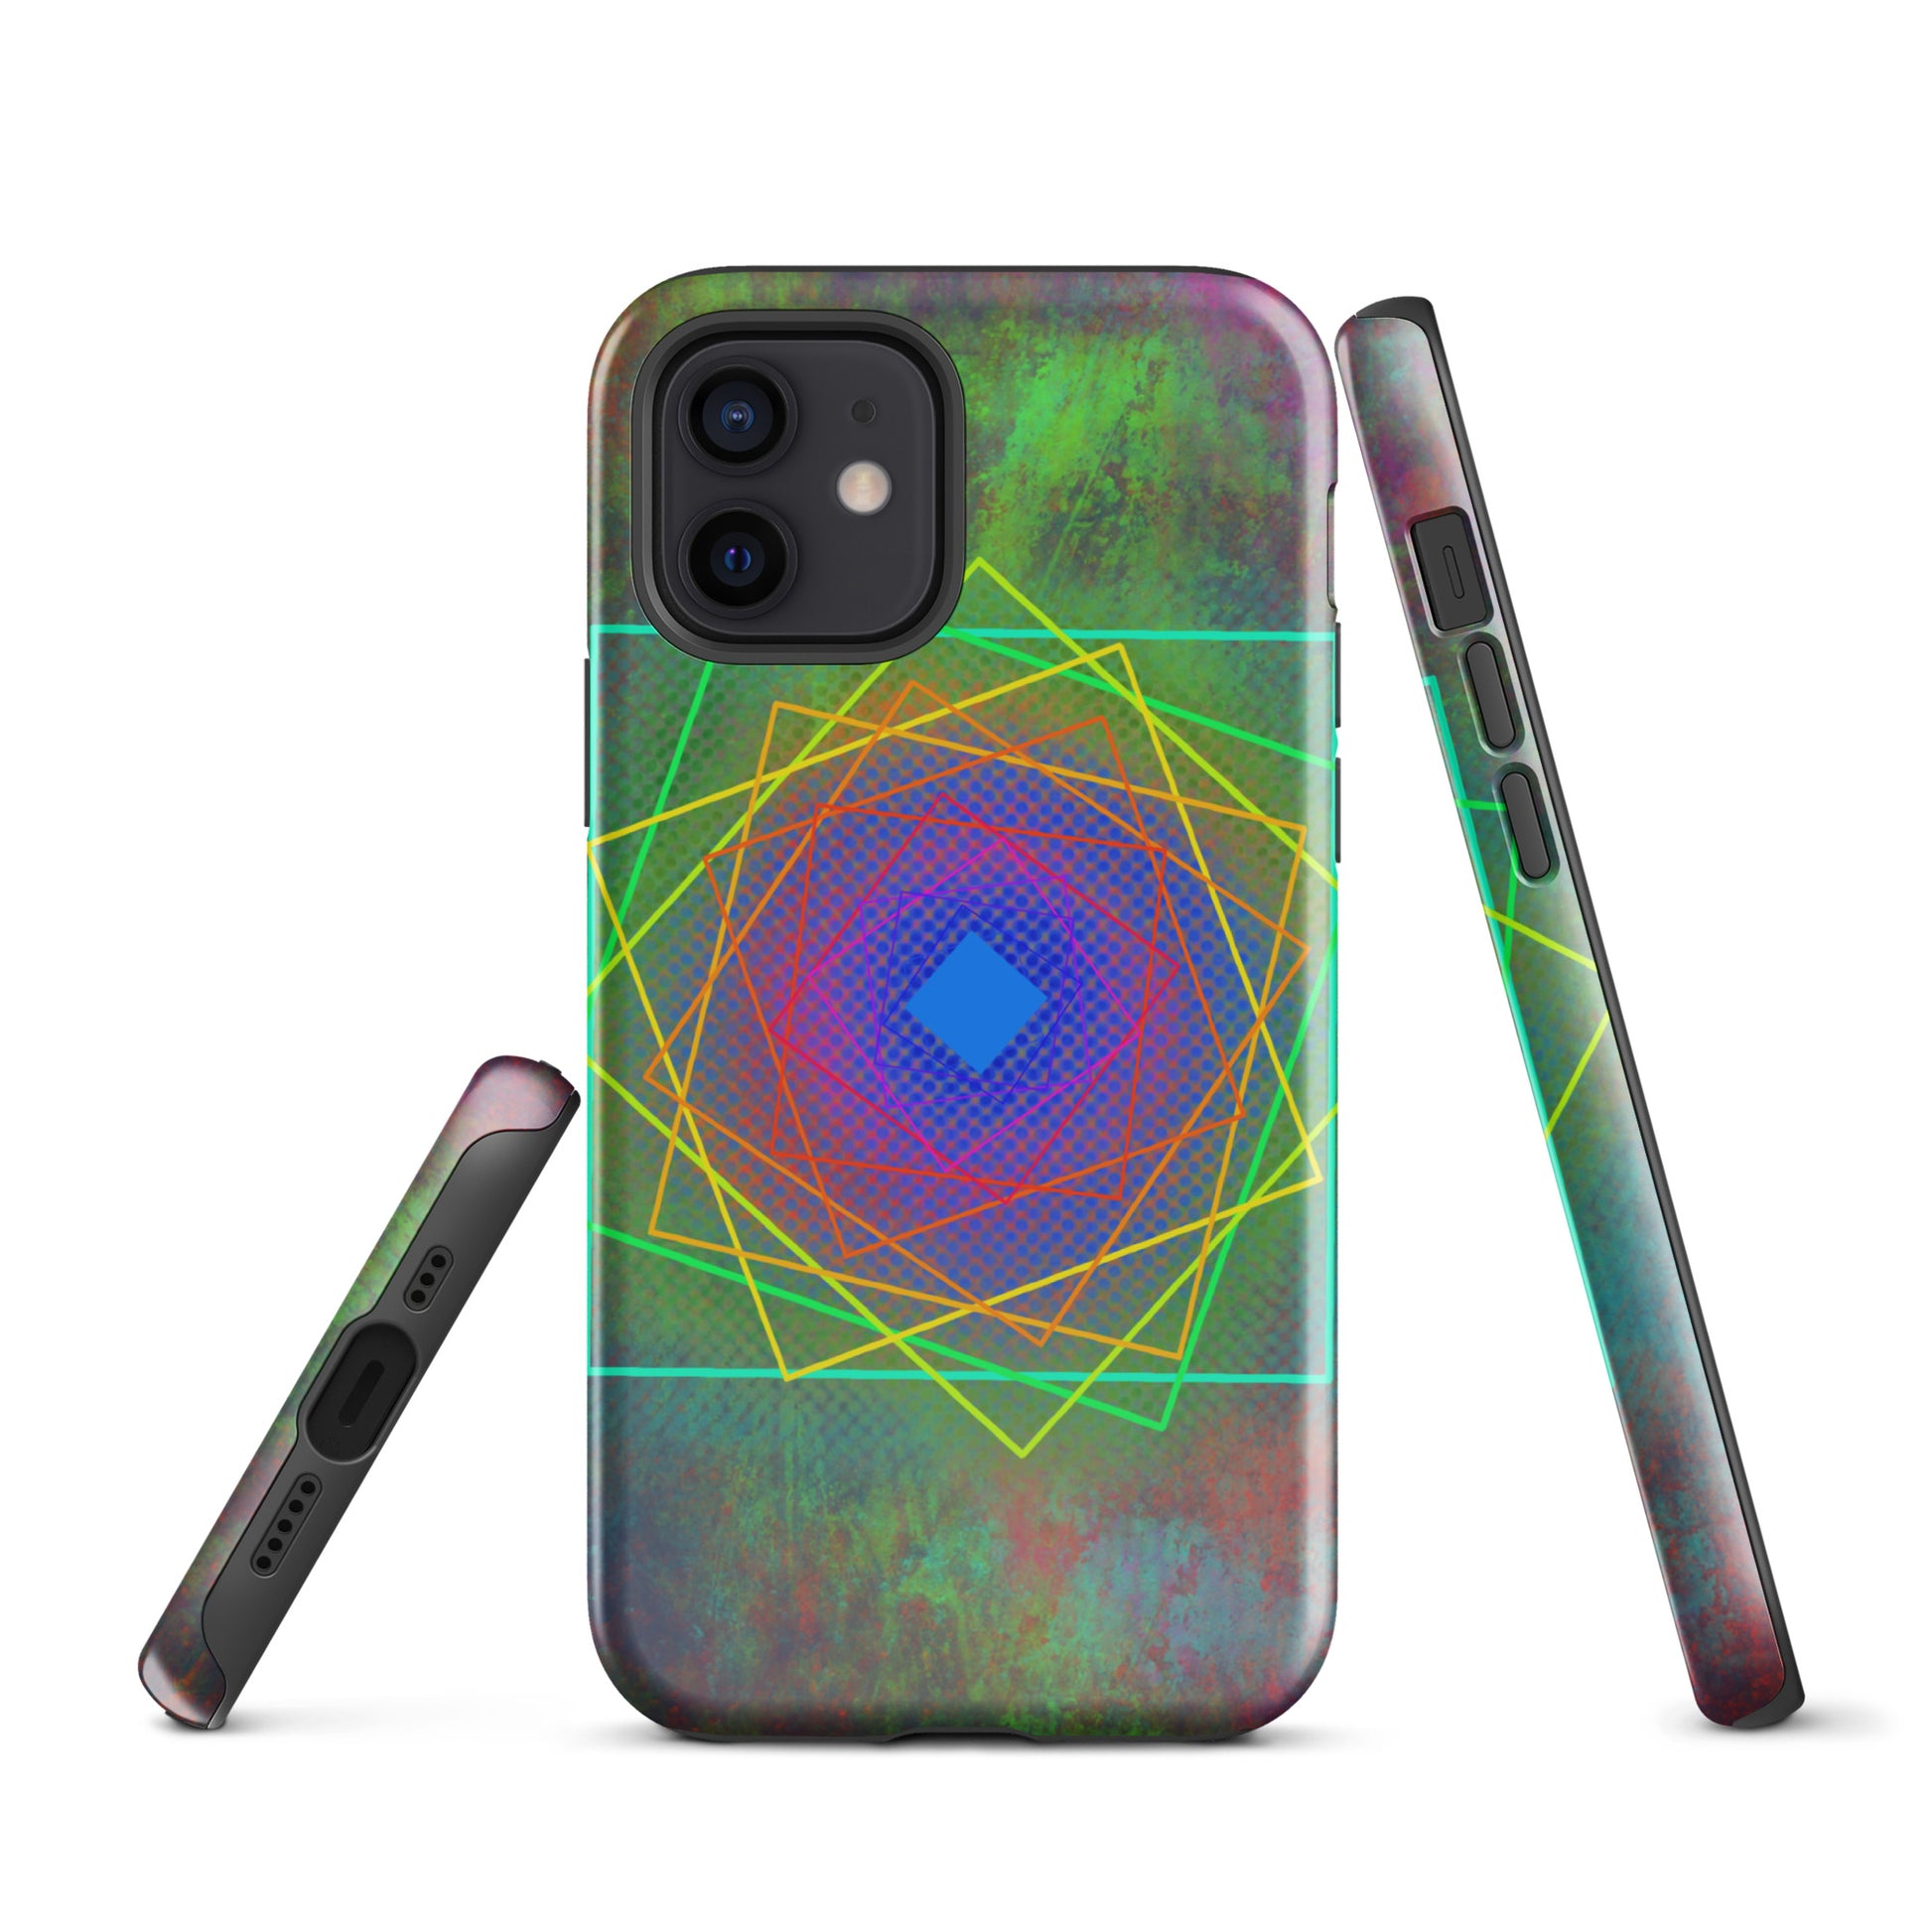 A Colourful Geometric Cubes Case for the iPhone 12 